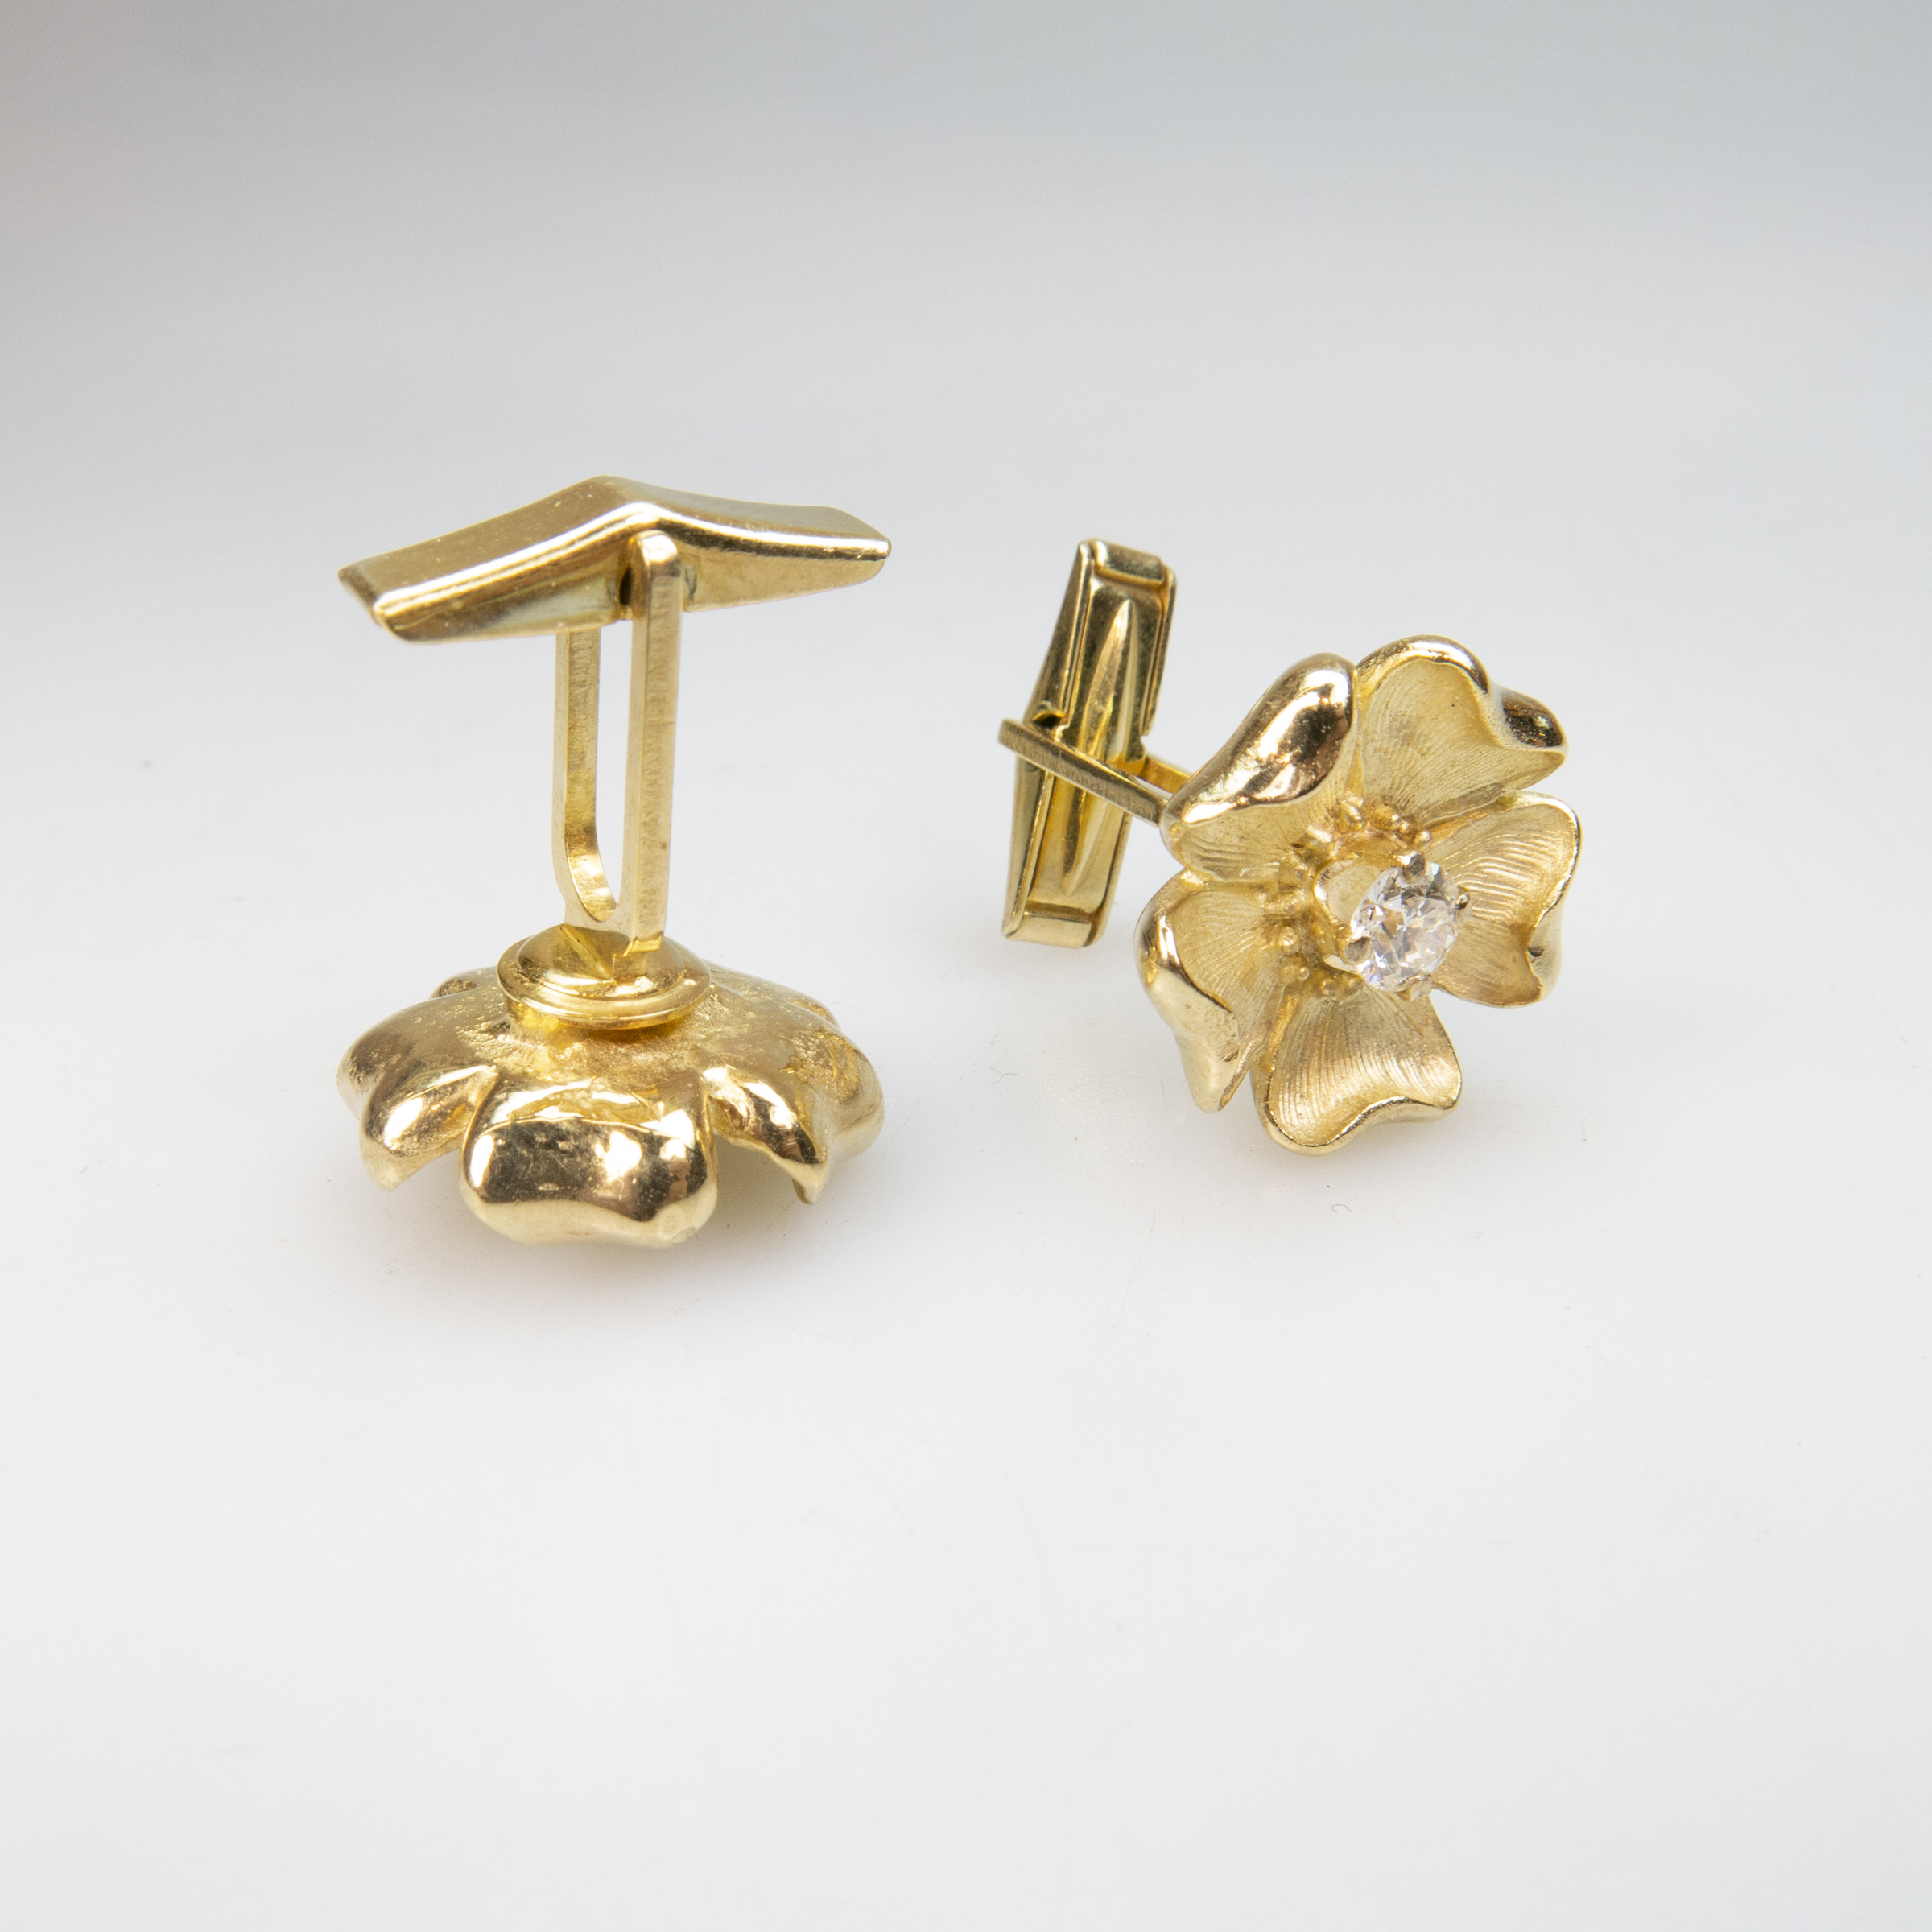 Pair Of Approximately 16k Yellow Gold Cufflinks